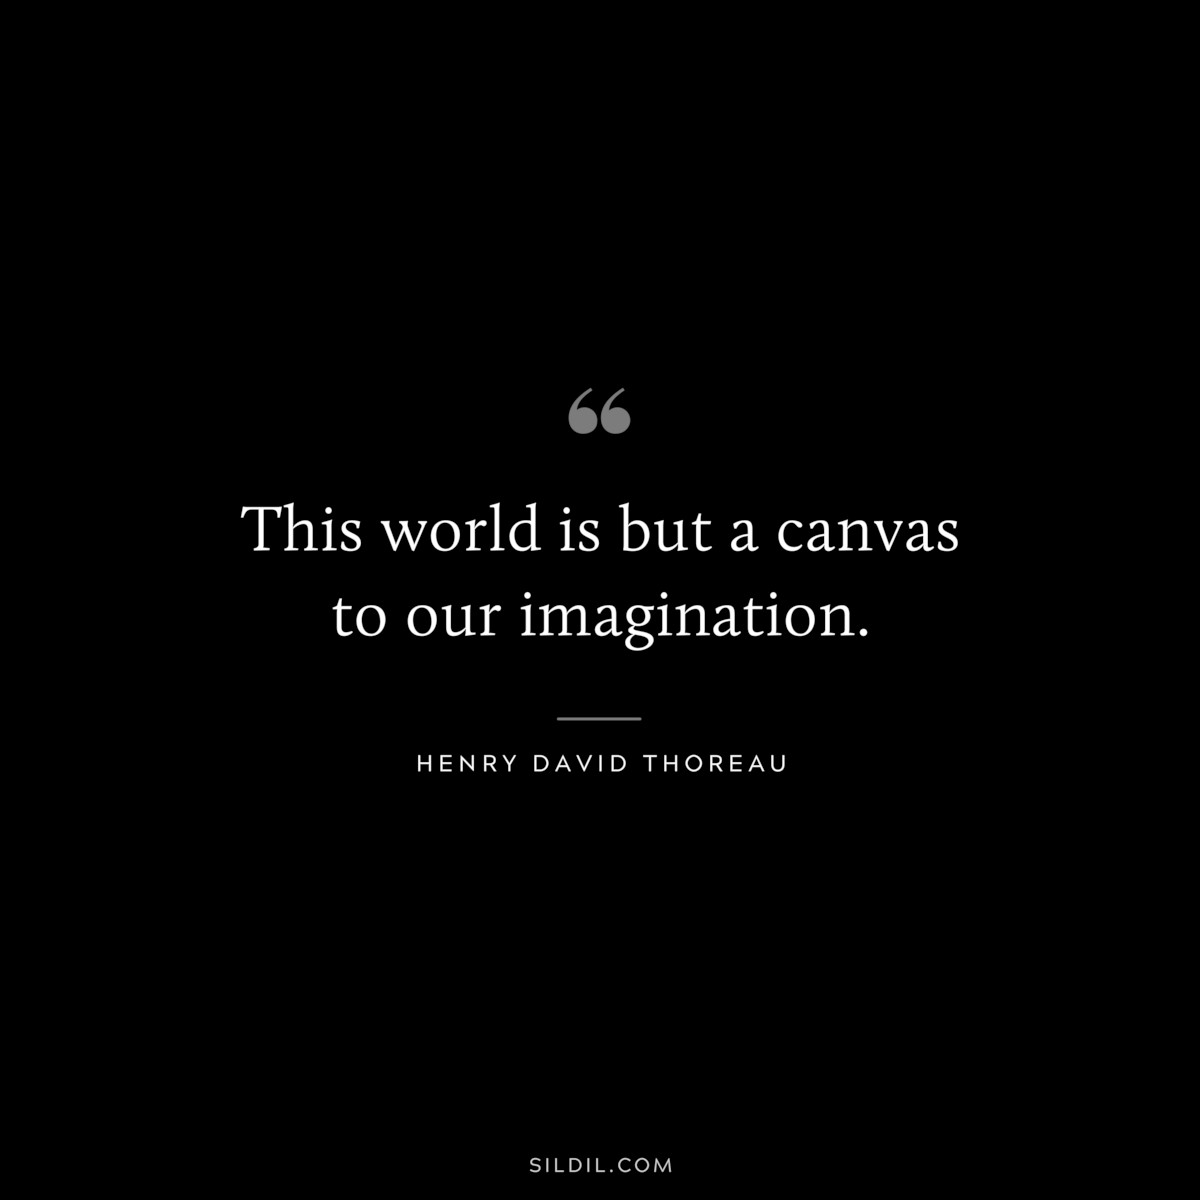 This world is but a canvas to our imagination. — Henry David Thoreau